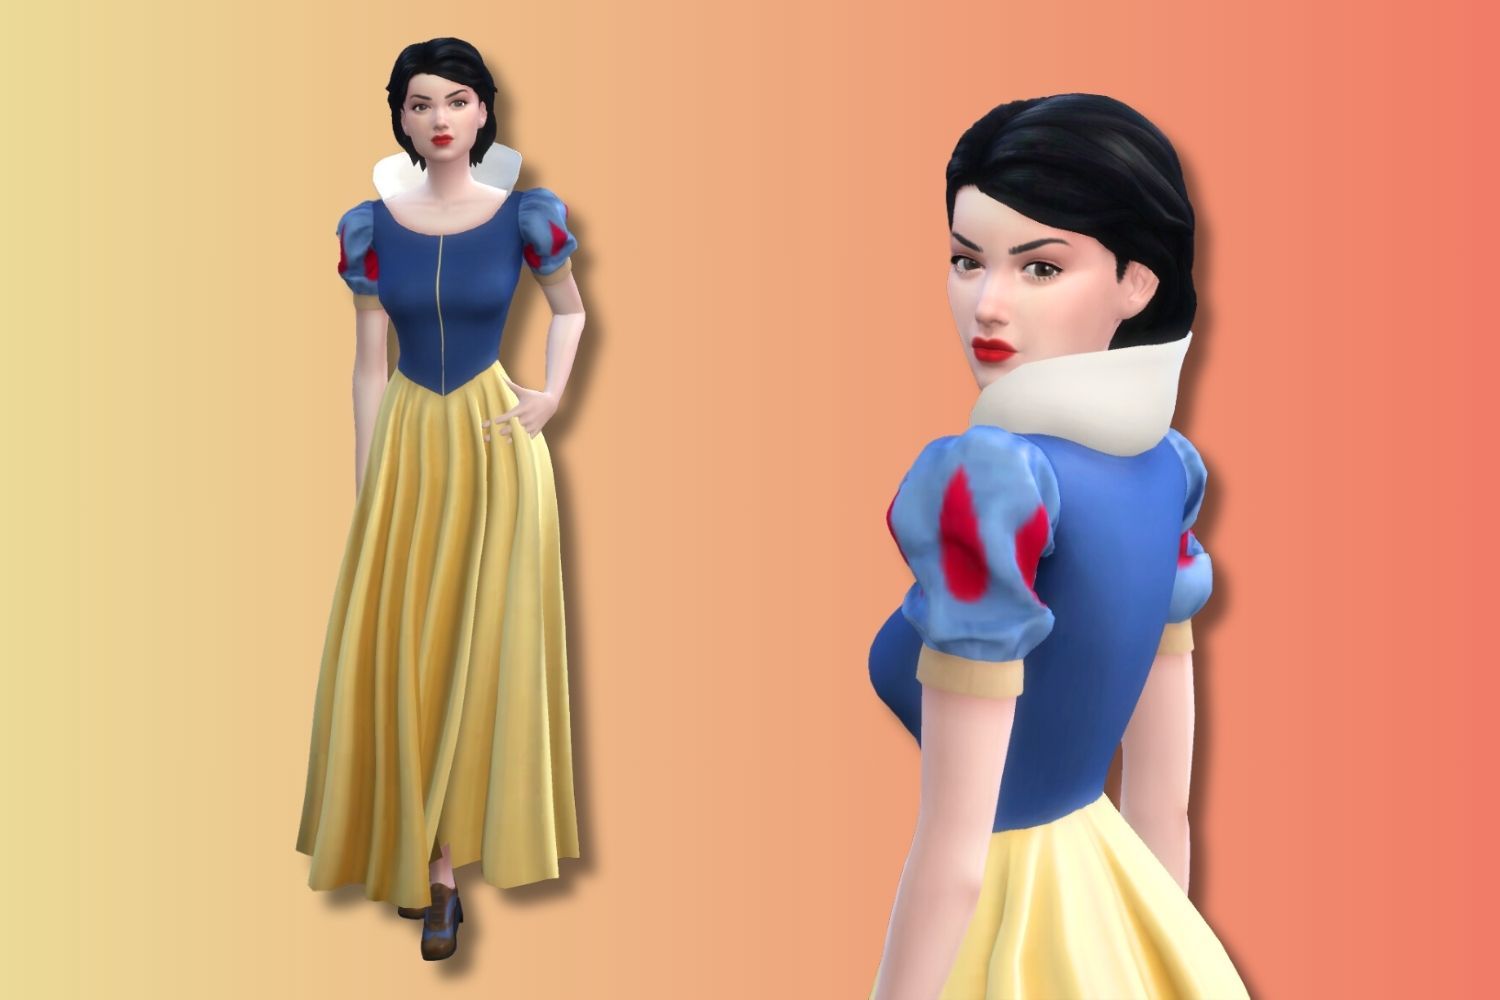 A Sim resembling Disney's Snow White stands against a yellow and red gradient background.